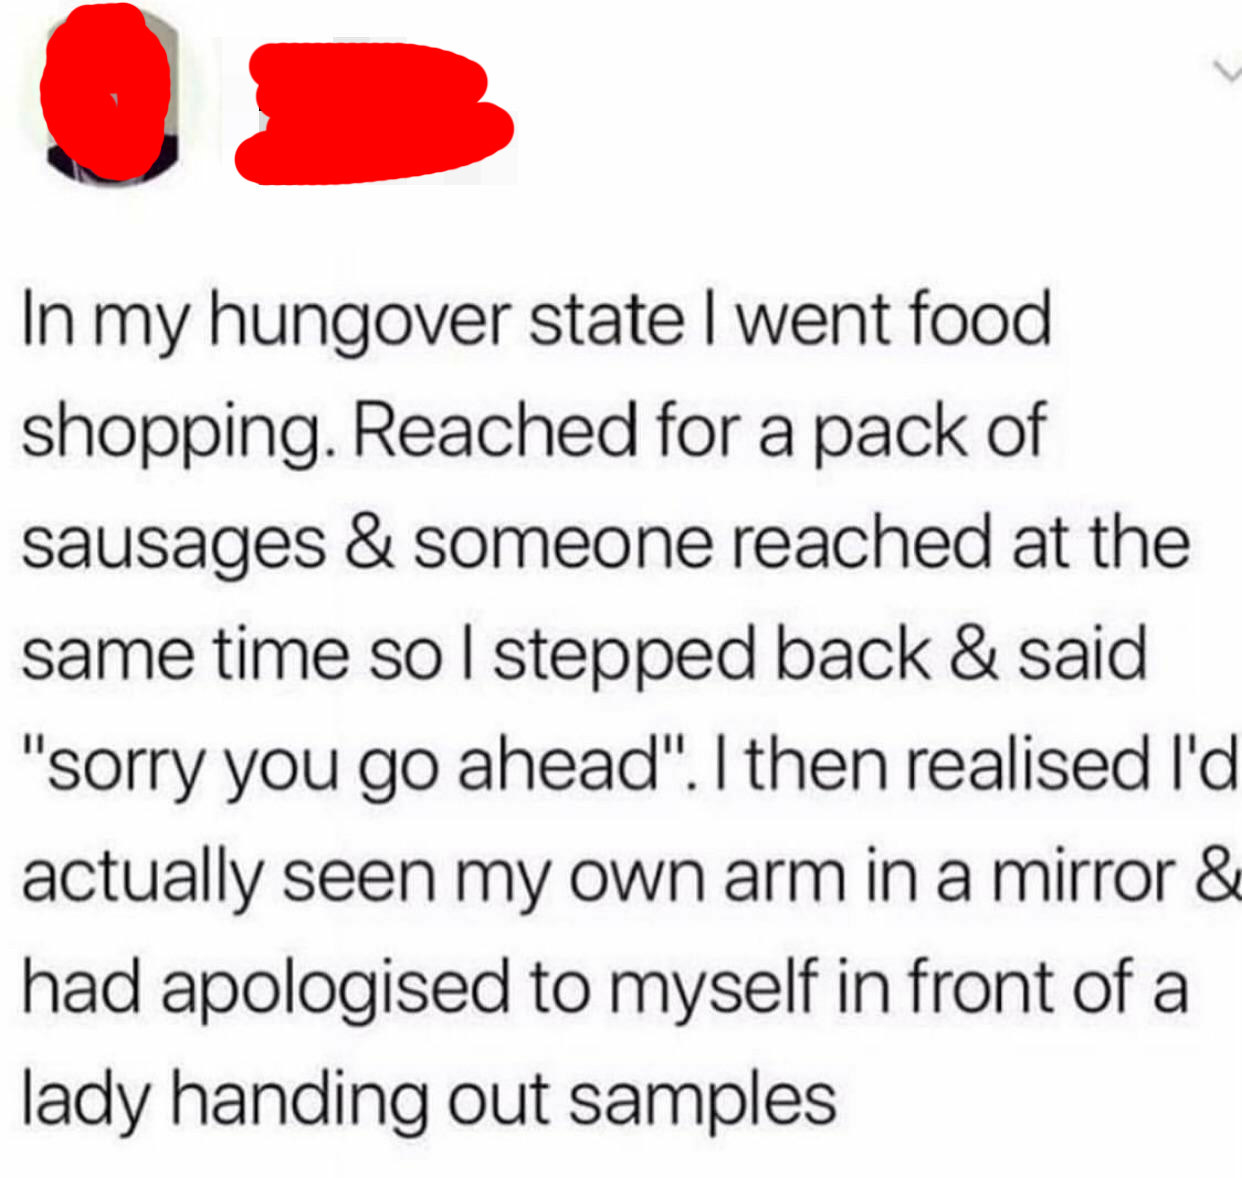 tweet reading in my hungover state i went food shopping reached for a pack of sausages and someone reached at the same time so i stepped back and said sorry you go ahead and realized it was my own arm 